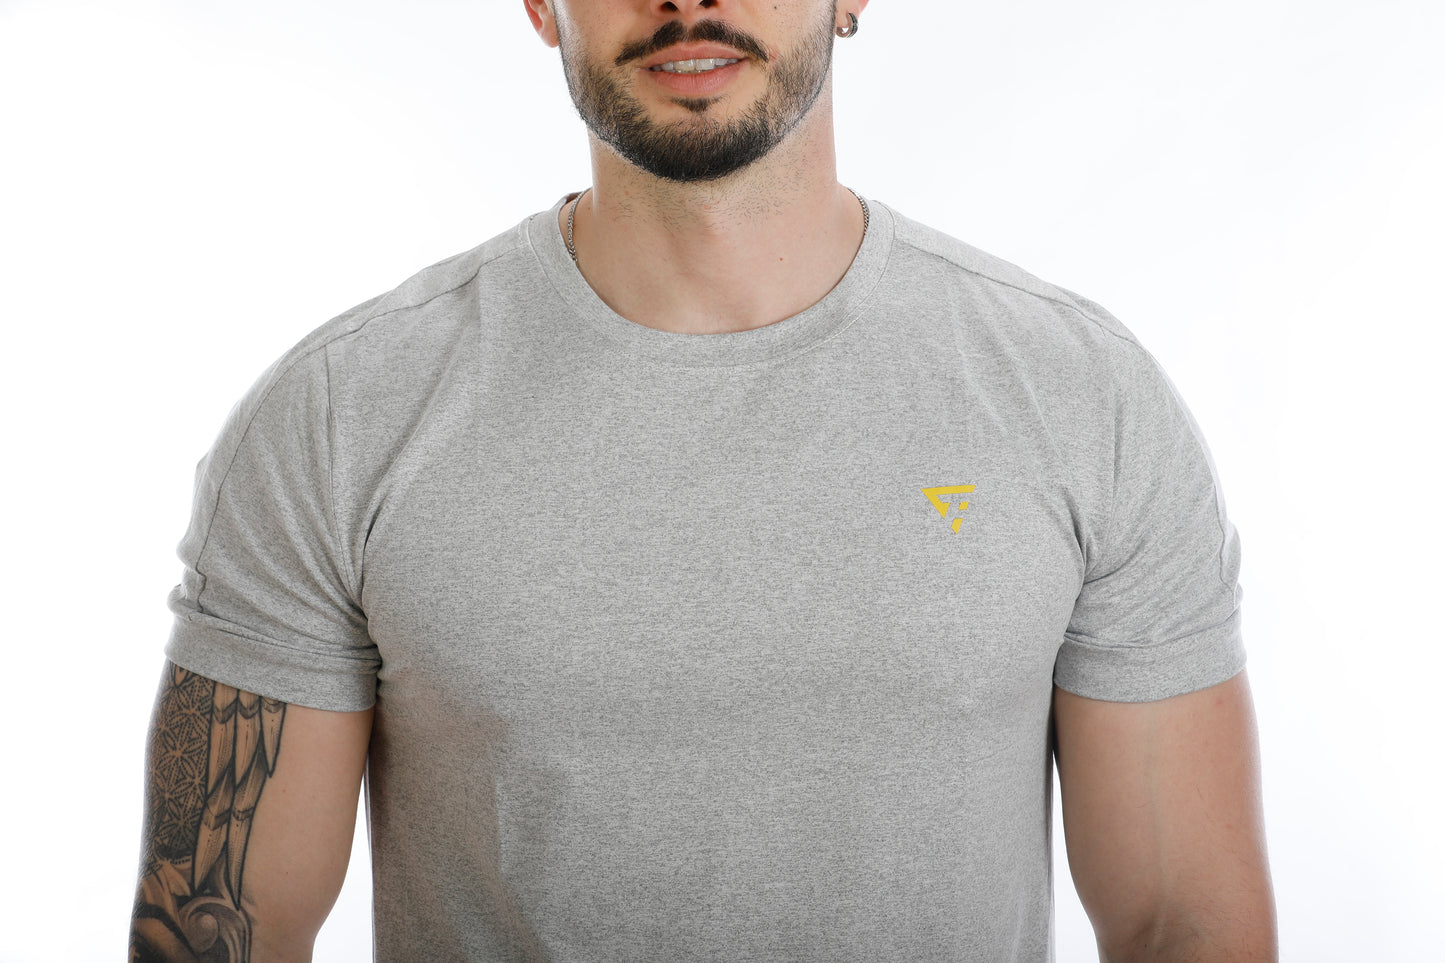 ARES stretch t-shirt (gray)